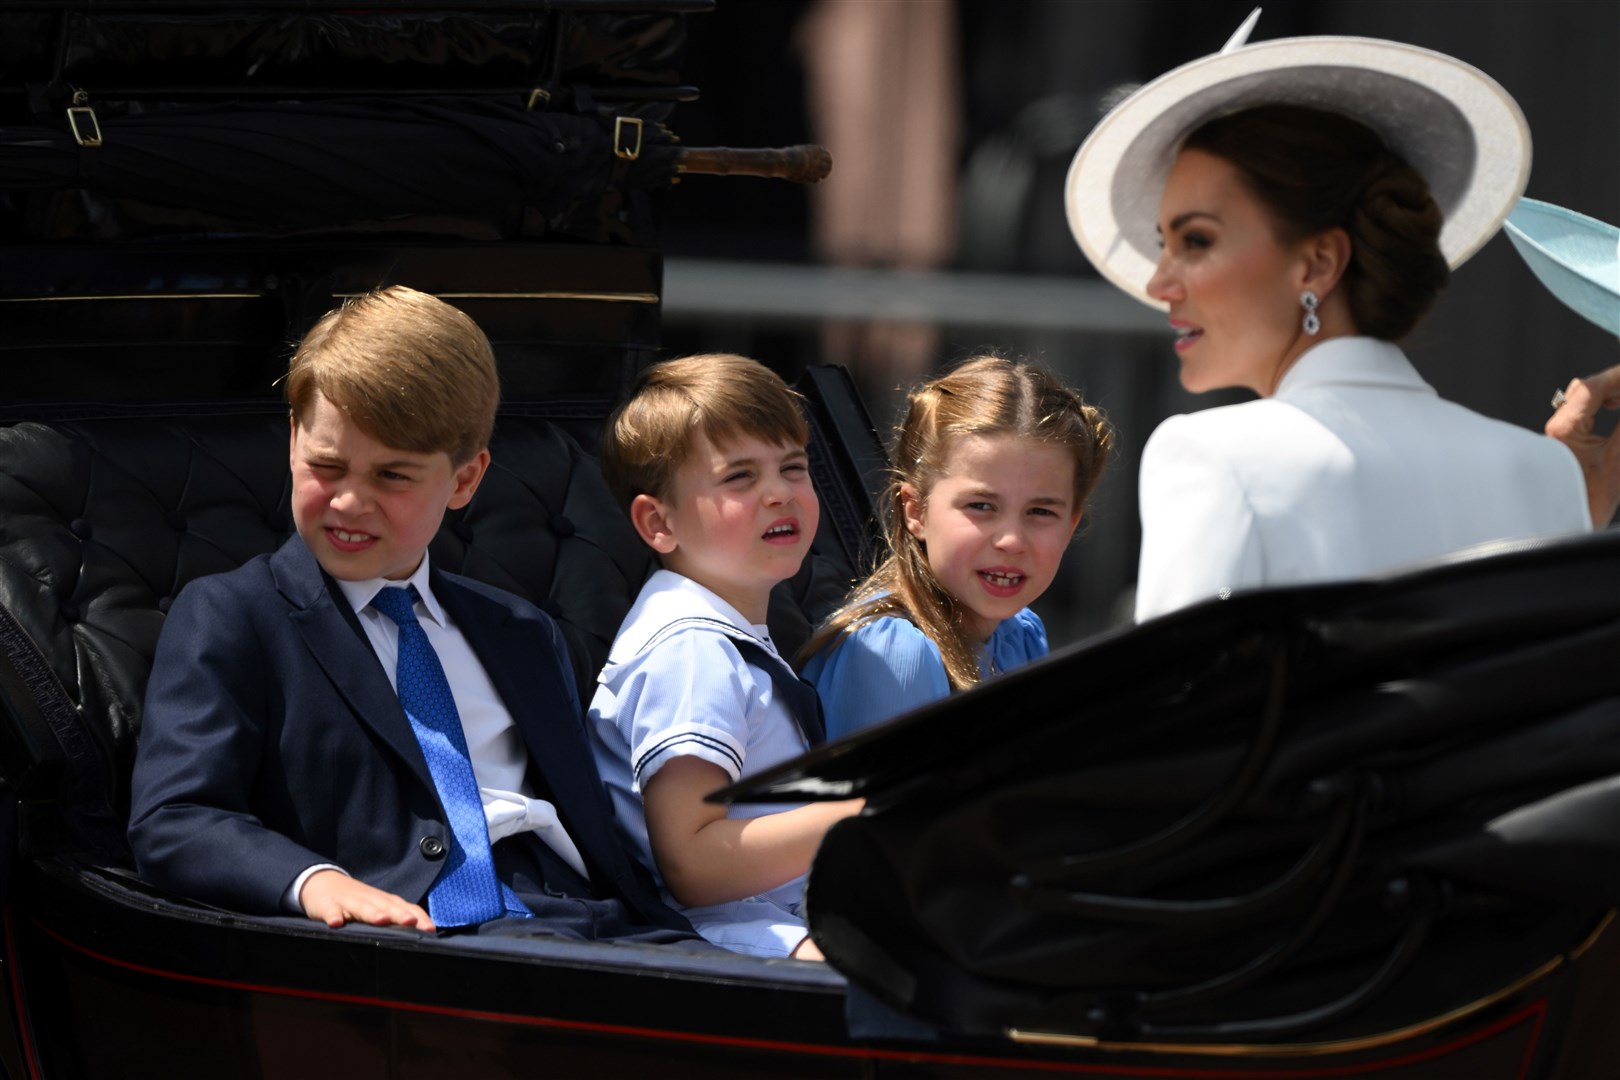 Prince George, Prince Louis, Princess Charlotte and the Duchess of Cambridge during Trooping the Colour (Adrian Dennis/PA)